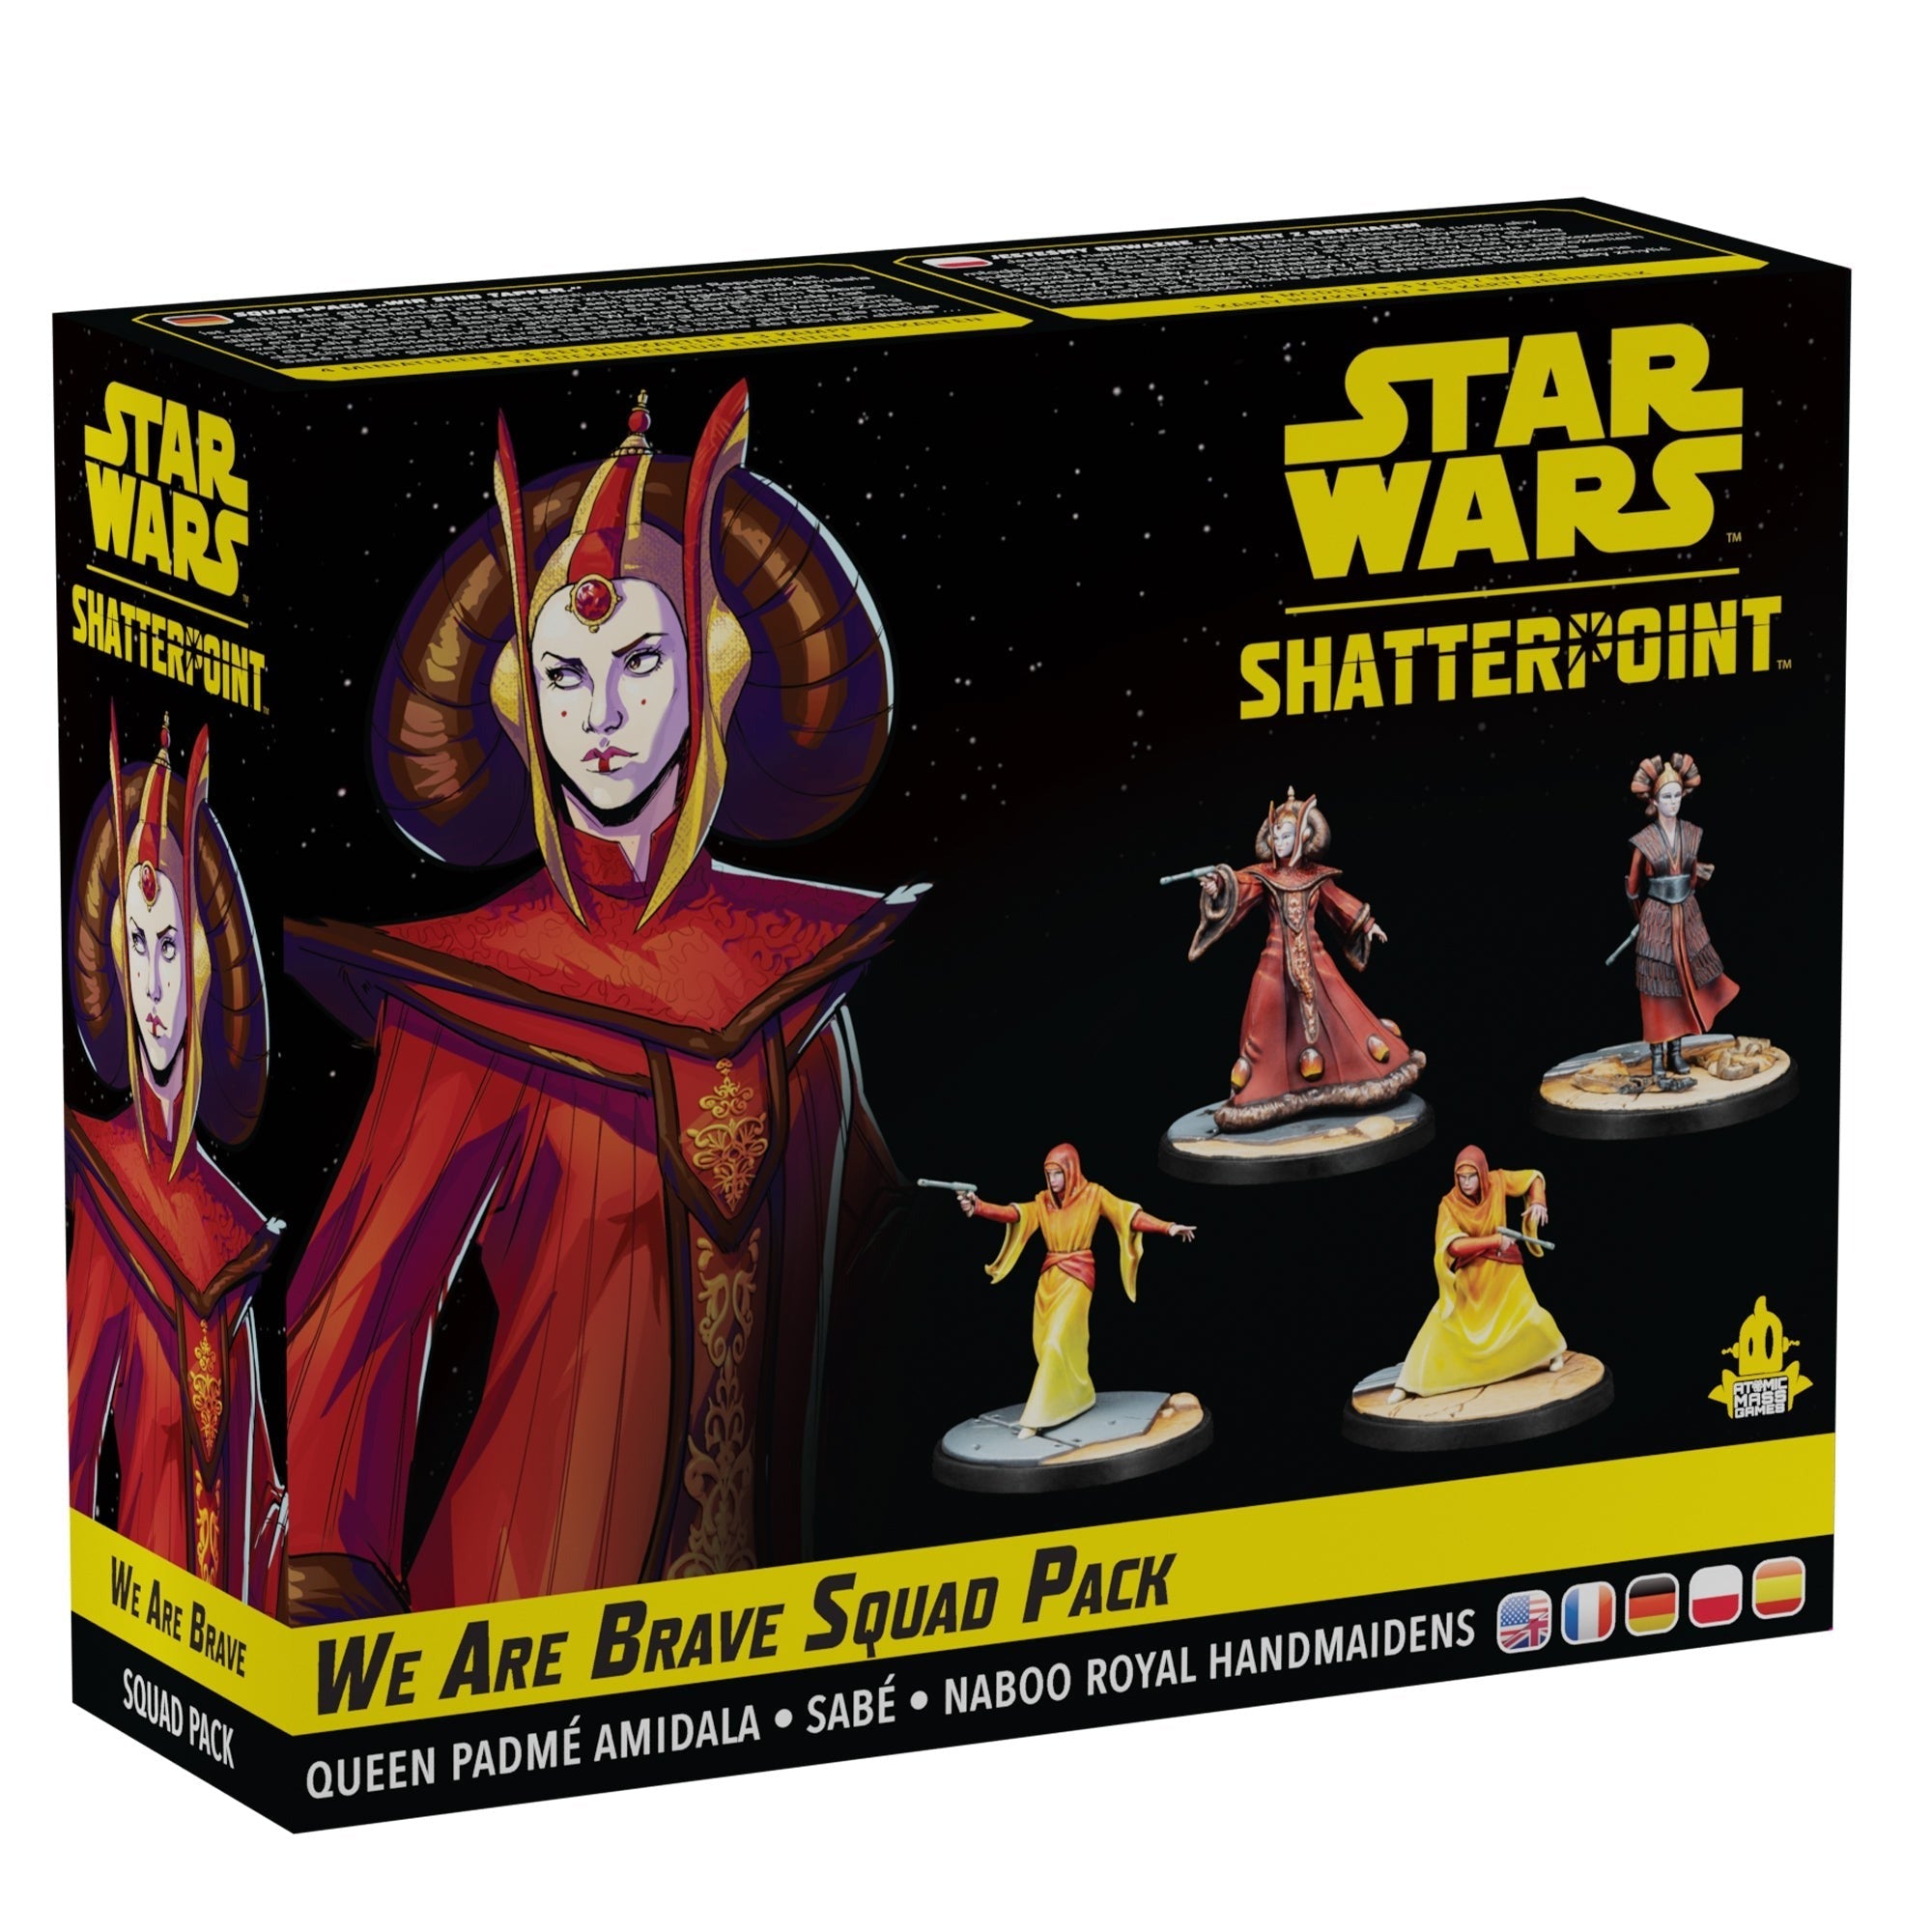 We Are Brave: Queen Padme Amidala Squad Pack